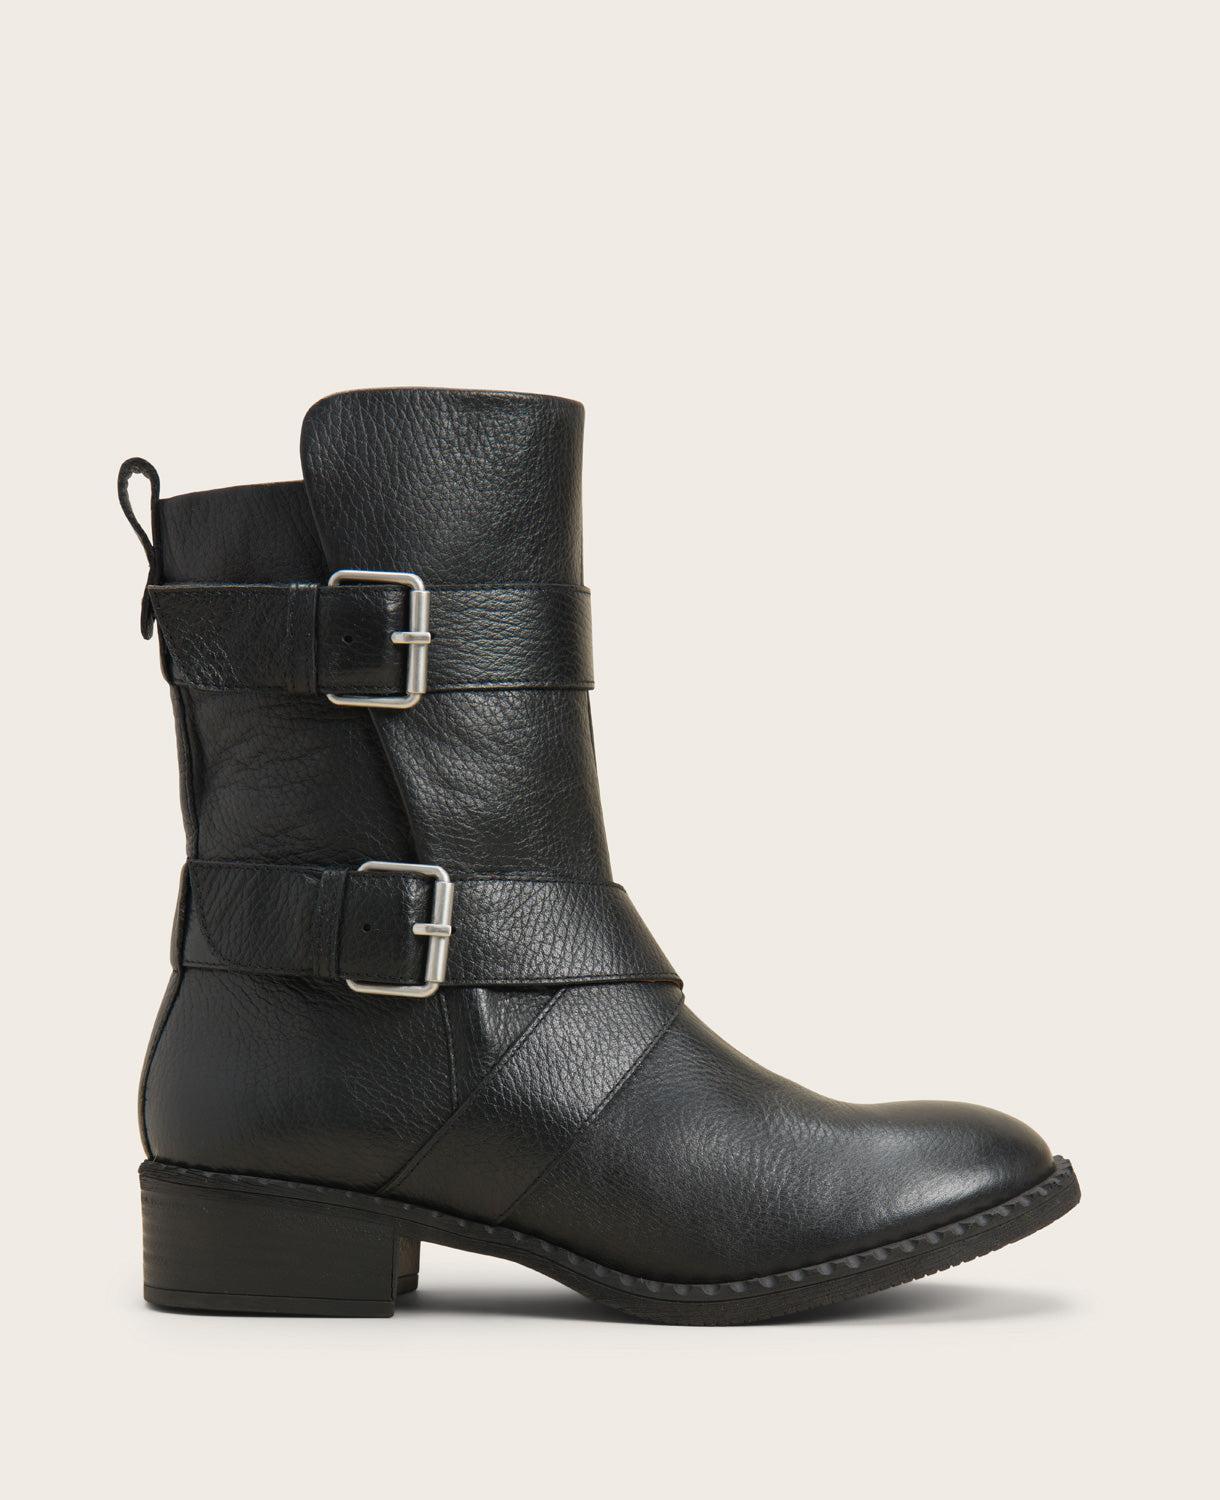 Gentle Souls | Best Double-Buckle Midshaft Moto Bootie in Black, Size: 9 by Kenneth Cole Product Image